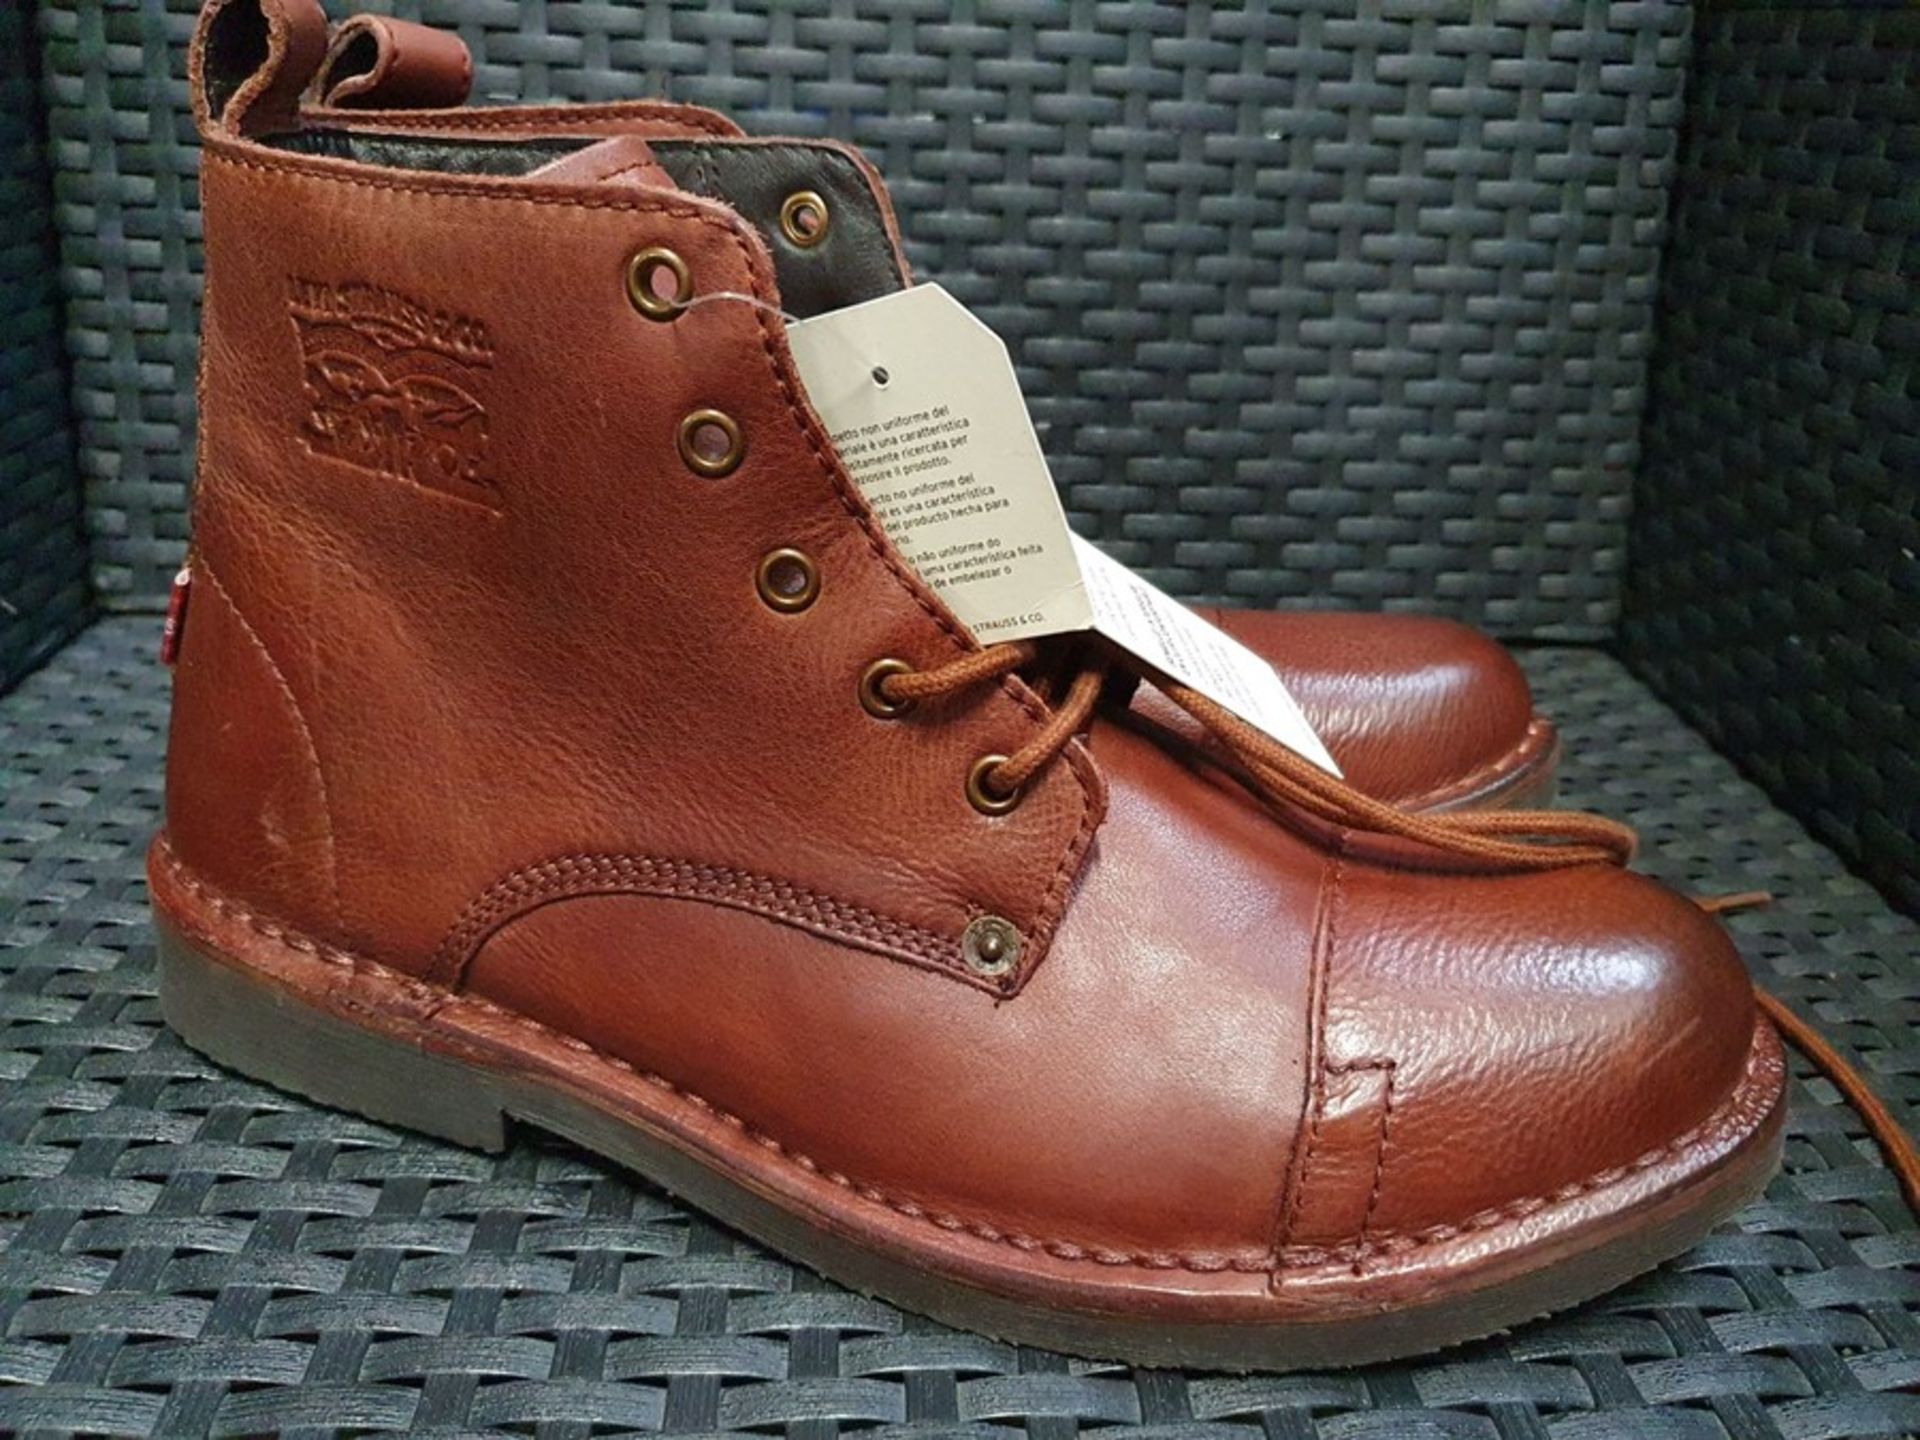 ONE PAIR OF LEVI'S TRACK LEATHER BOOTS IN BROWN - SIZE UK 9. RRP £100.00. GRADE A - AS NEW, ONE